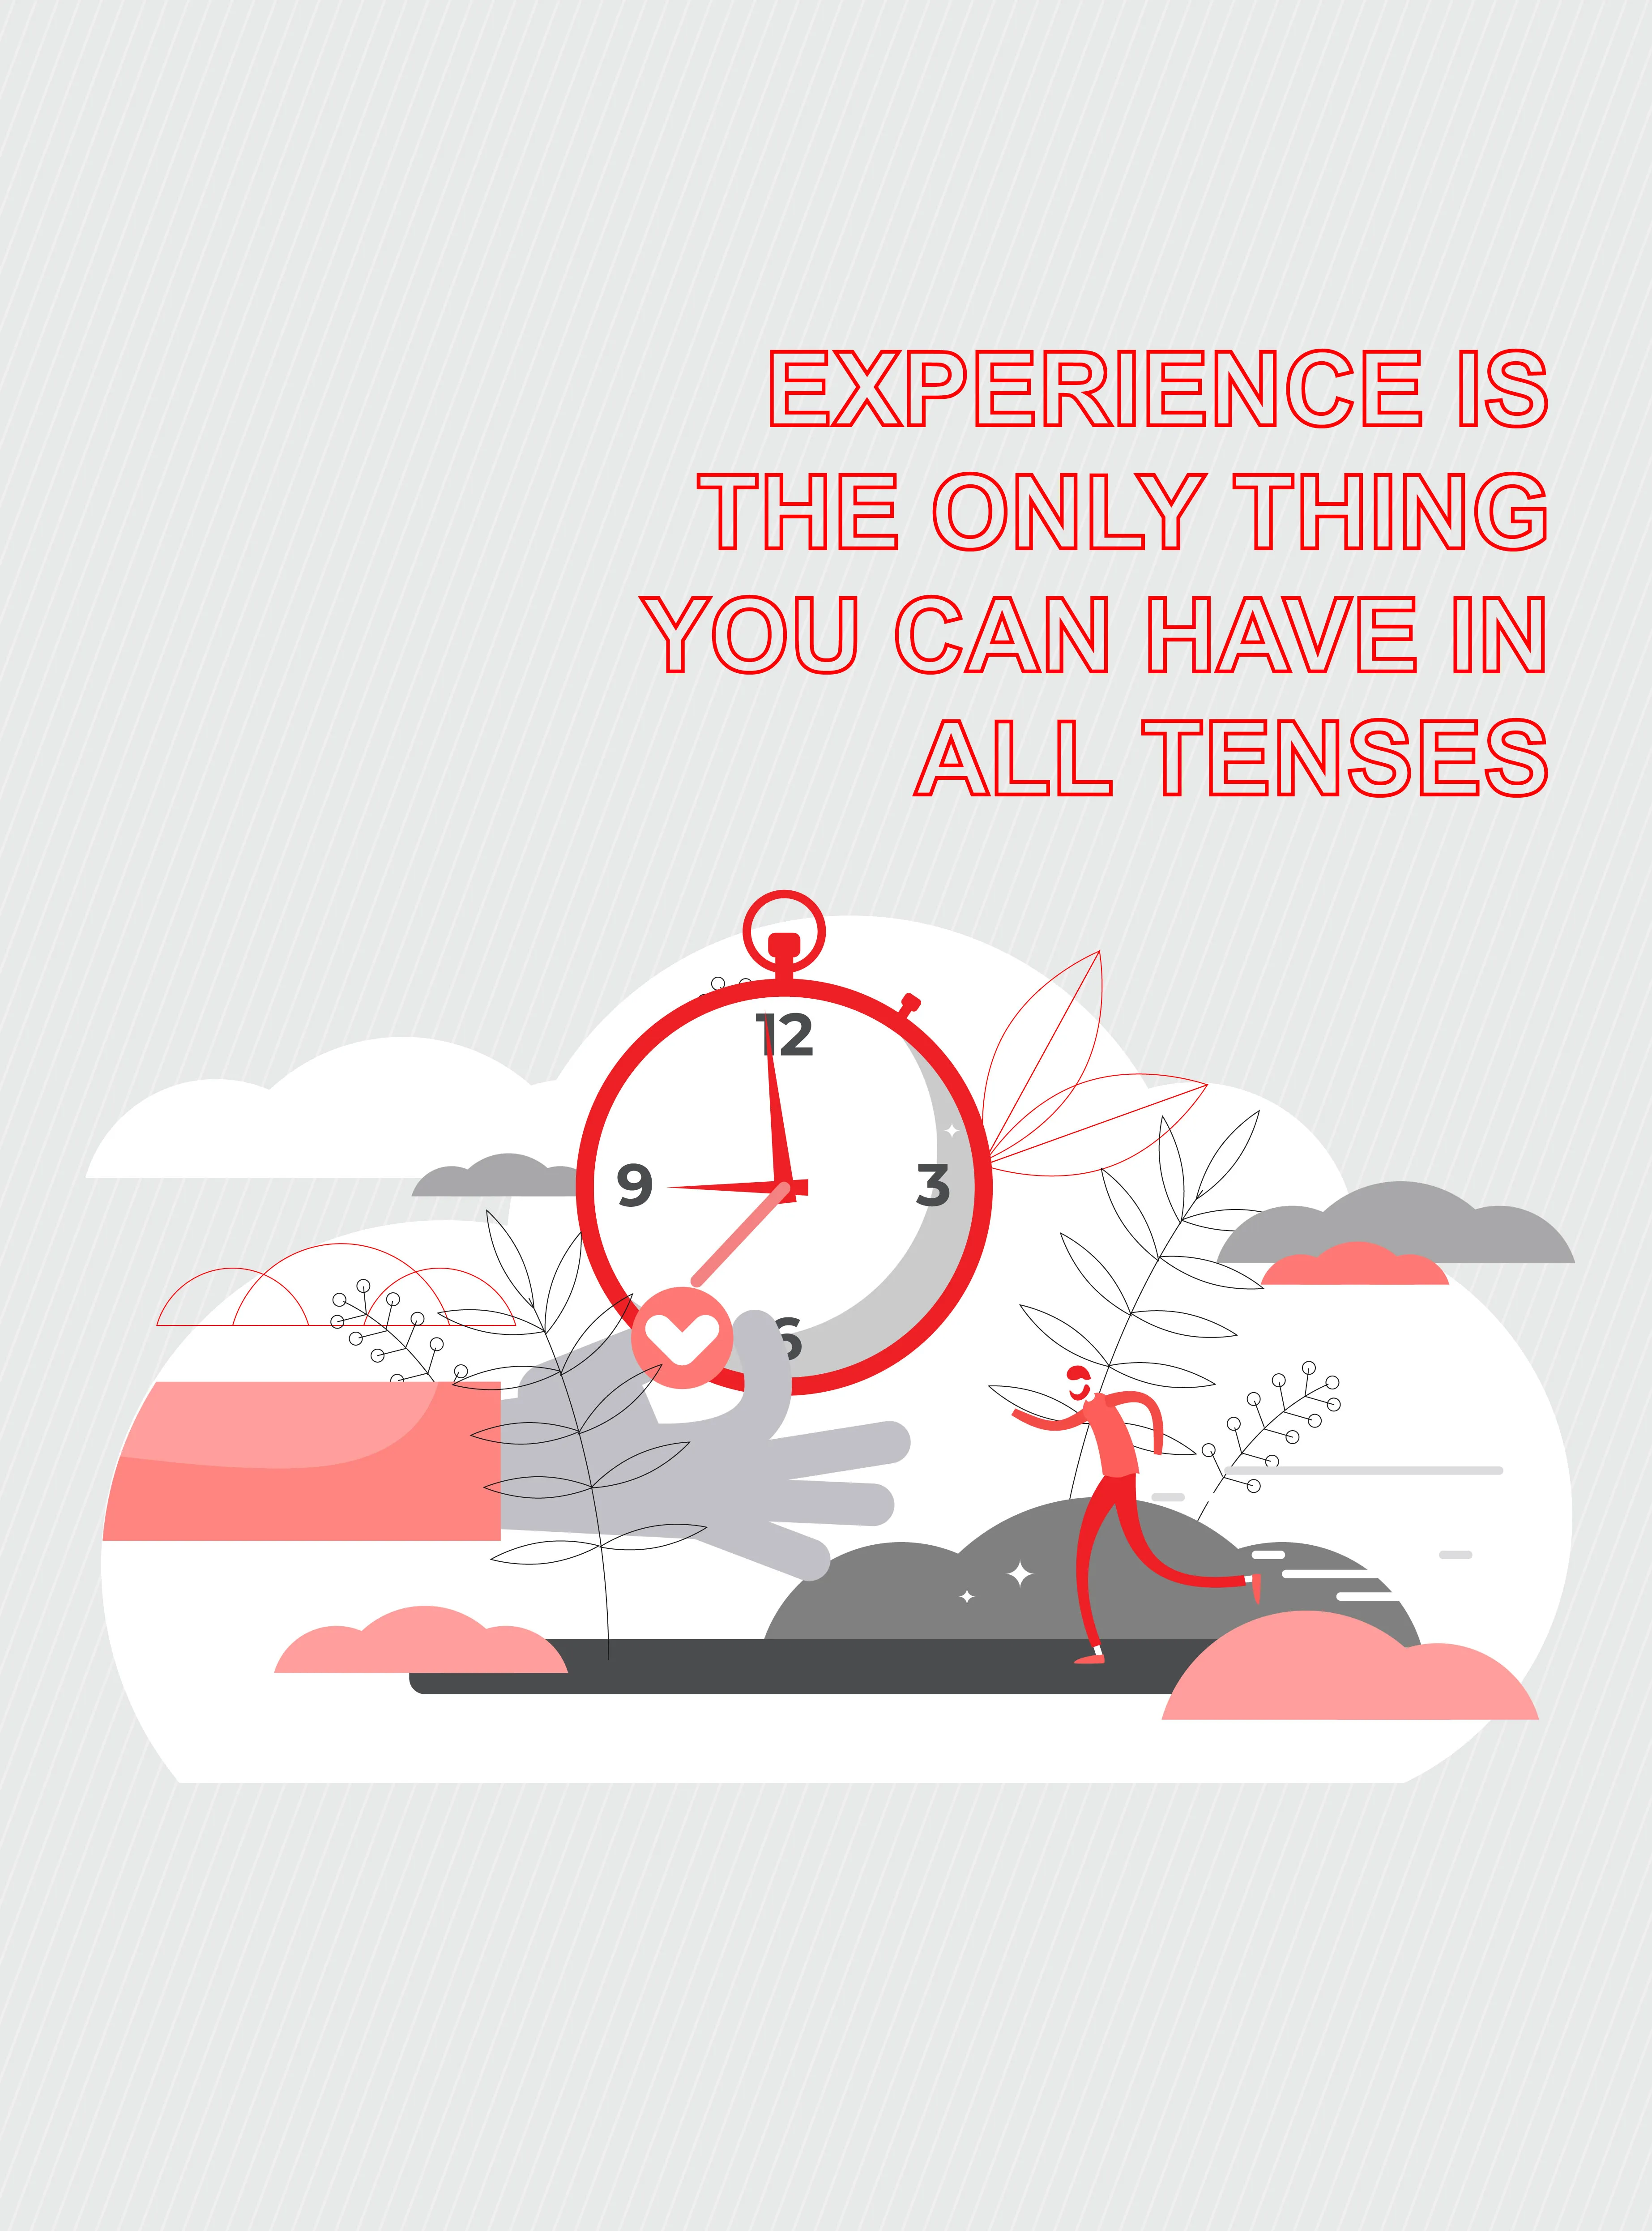 Experience is the only thing you can have in all tenses